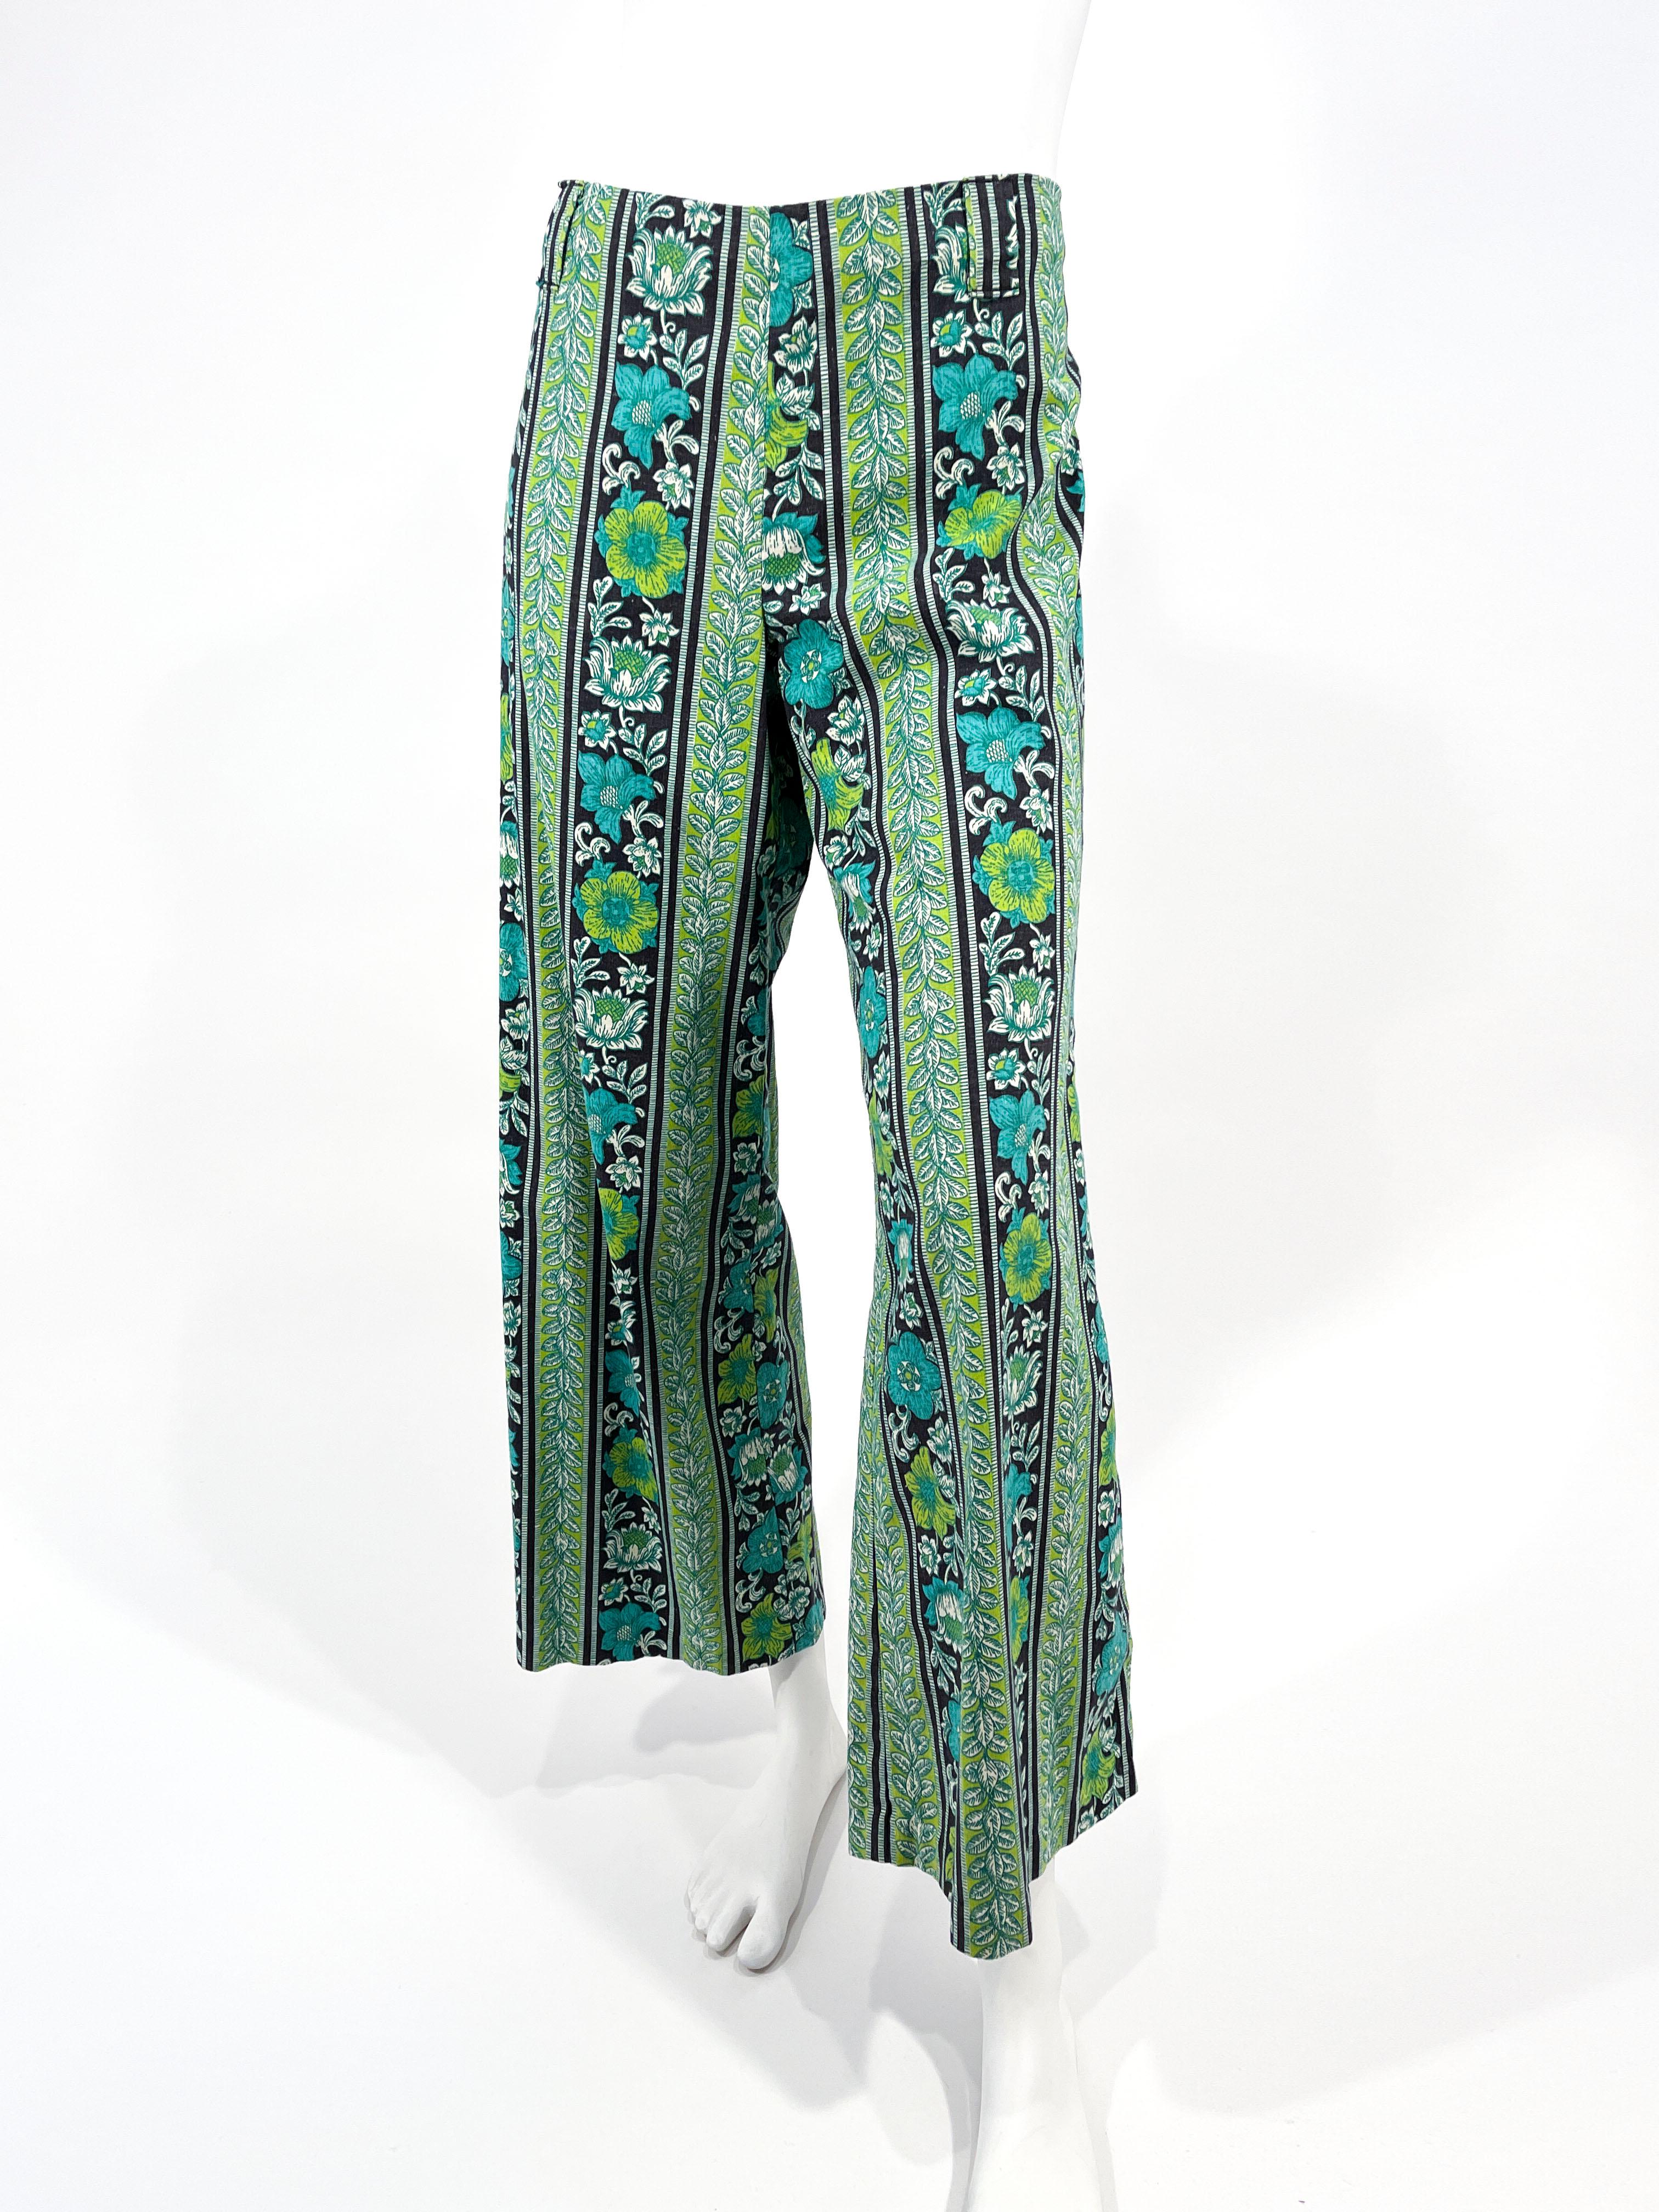 Gray 1960s Psychedelic Printed Flared Hip Hugger Pants For Sale